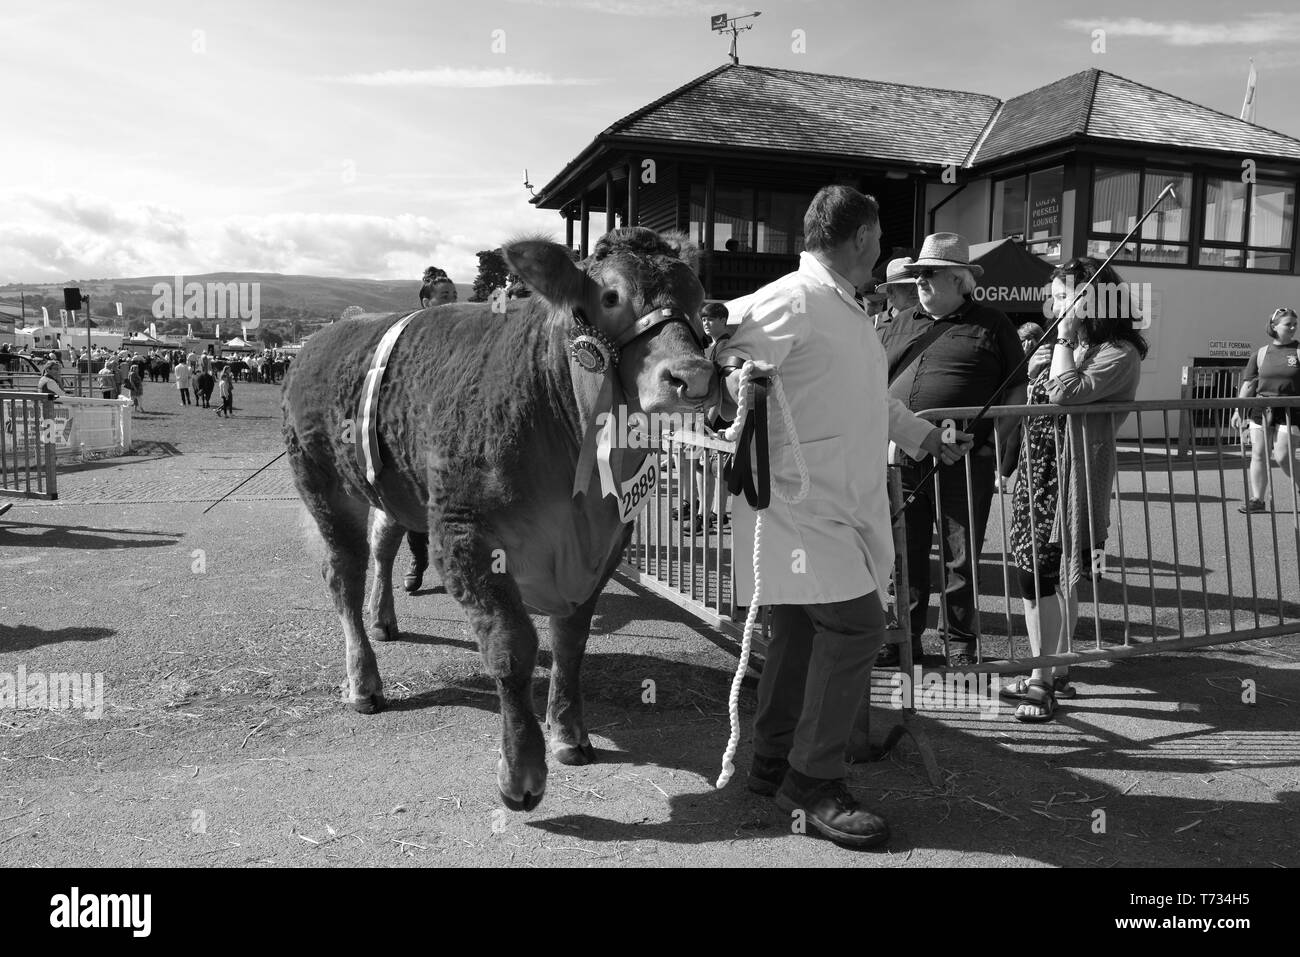 Royal Welsh Show. Stock Photo